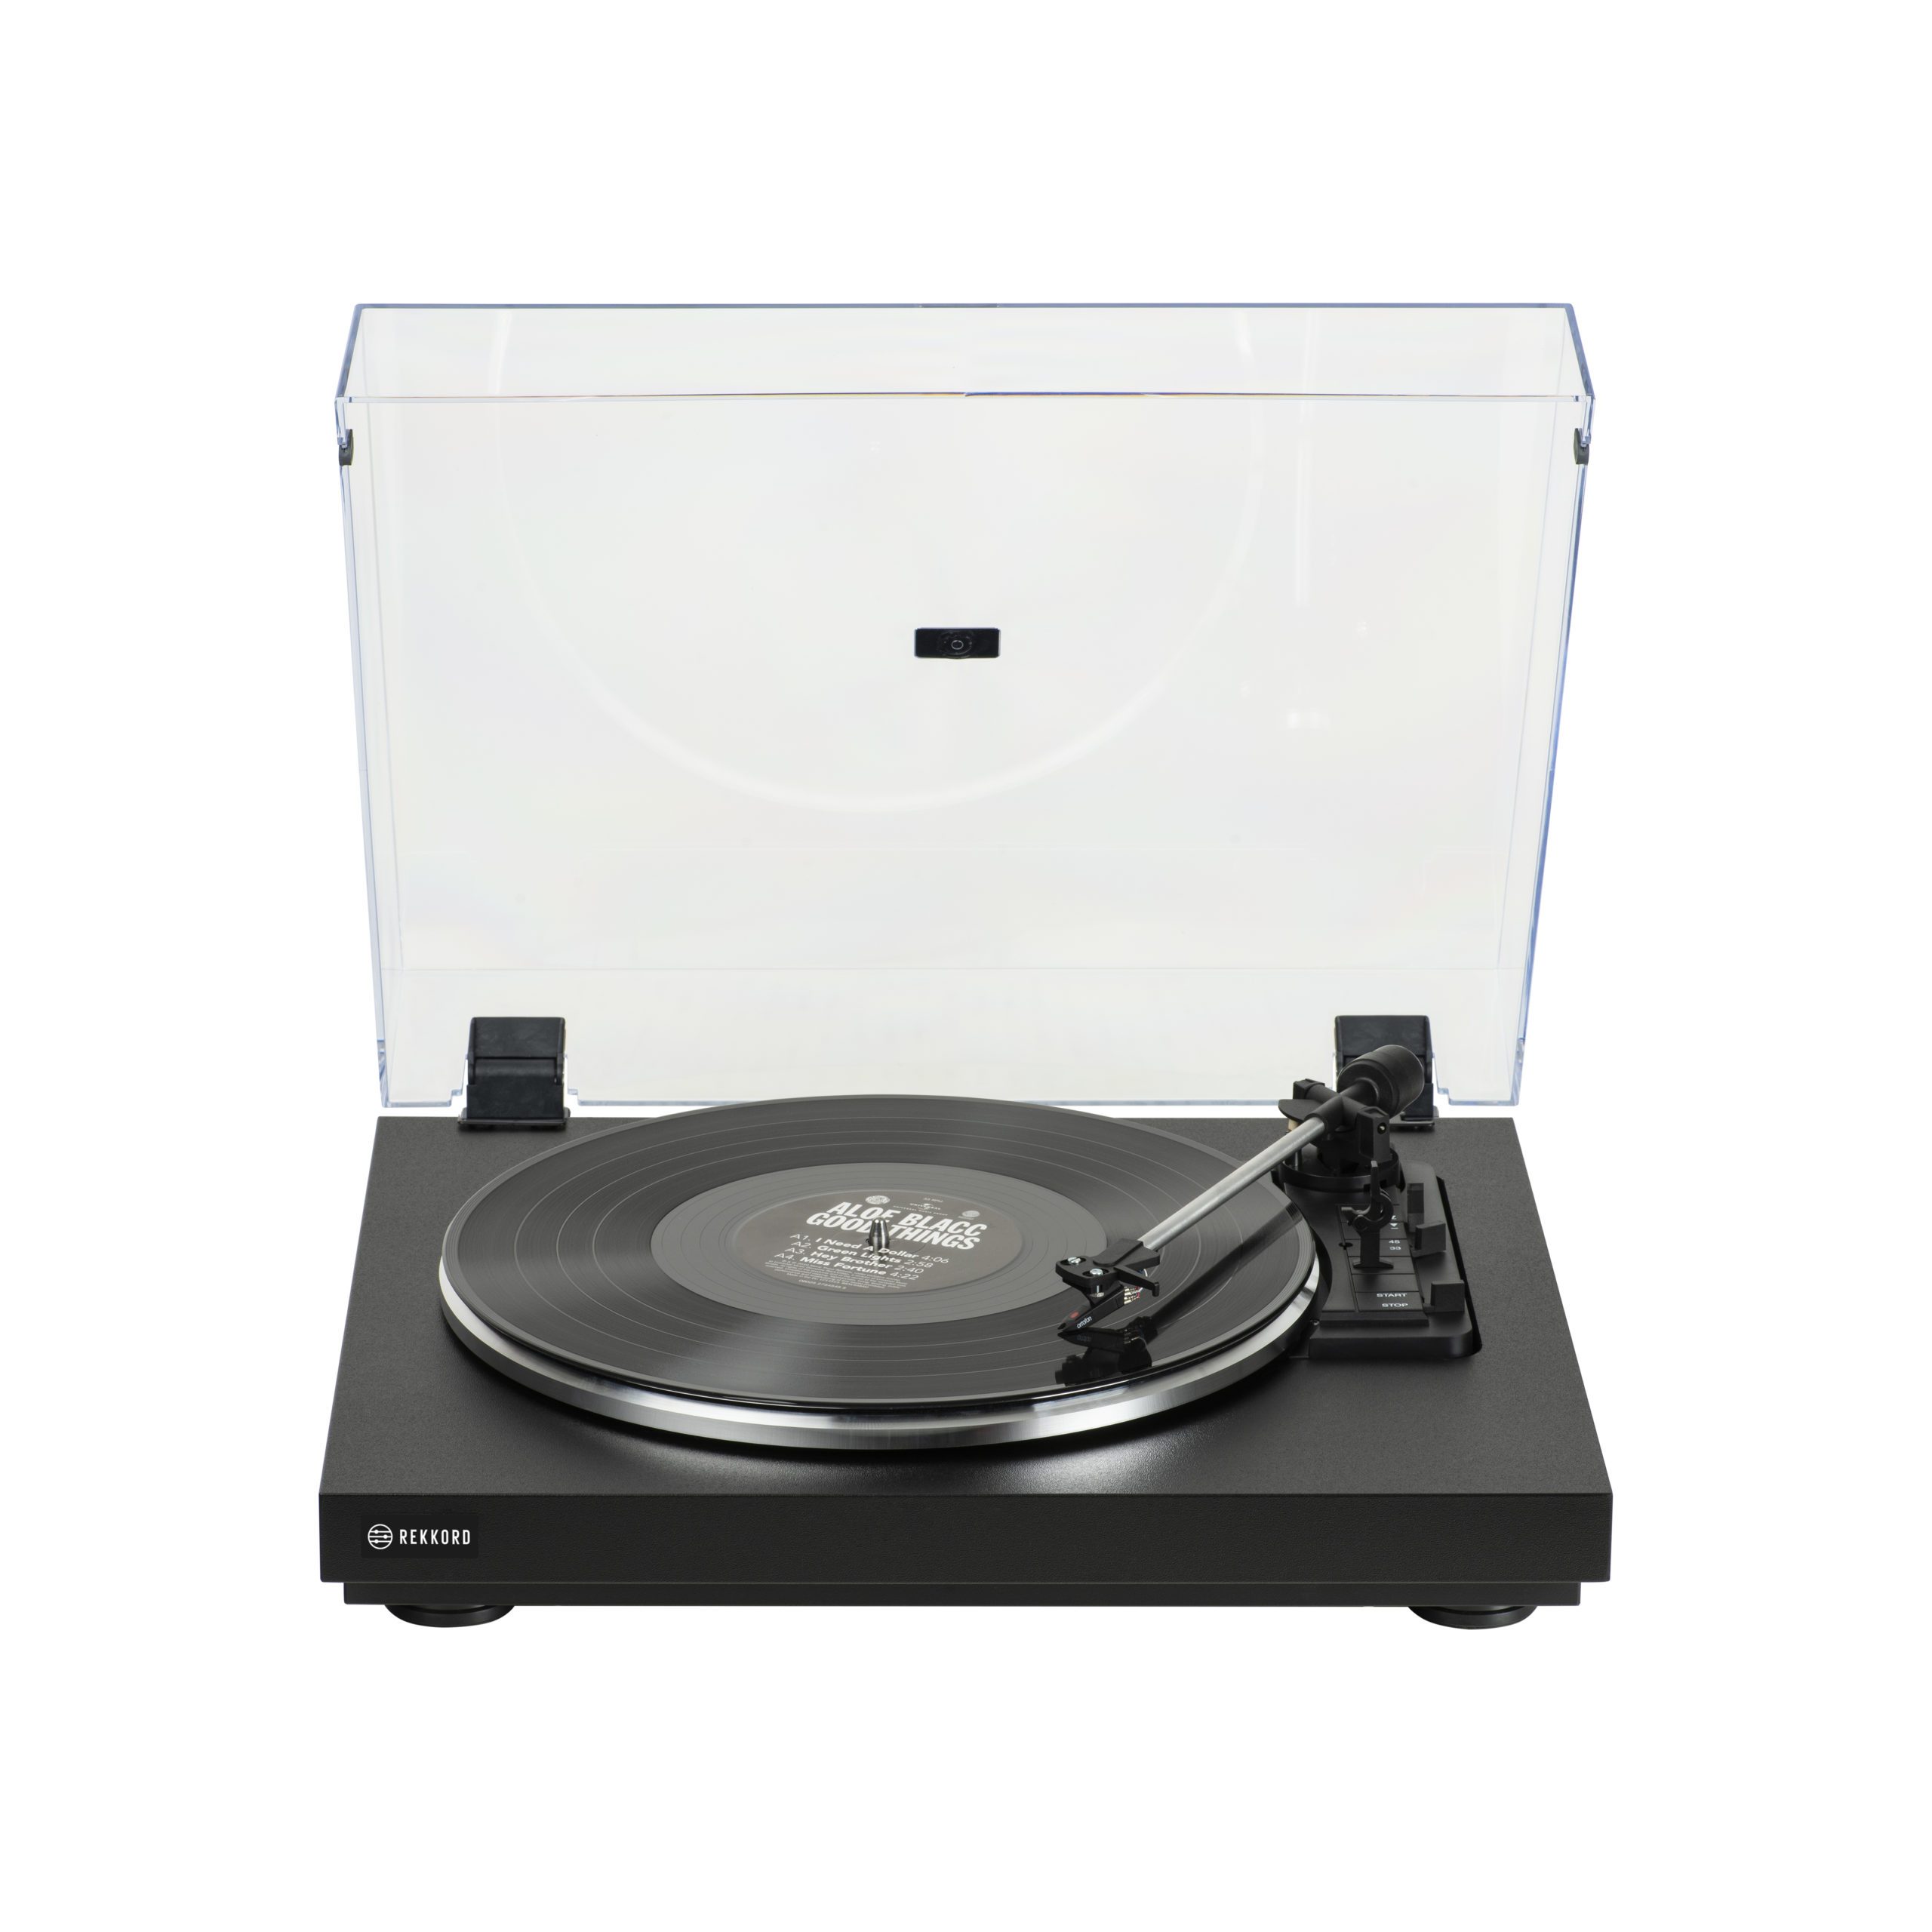 F110 Sub Chassis Turntable with, AT3600 cartridge